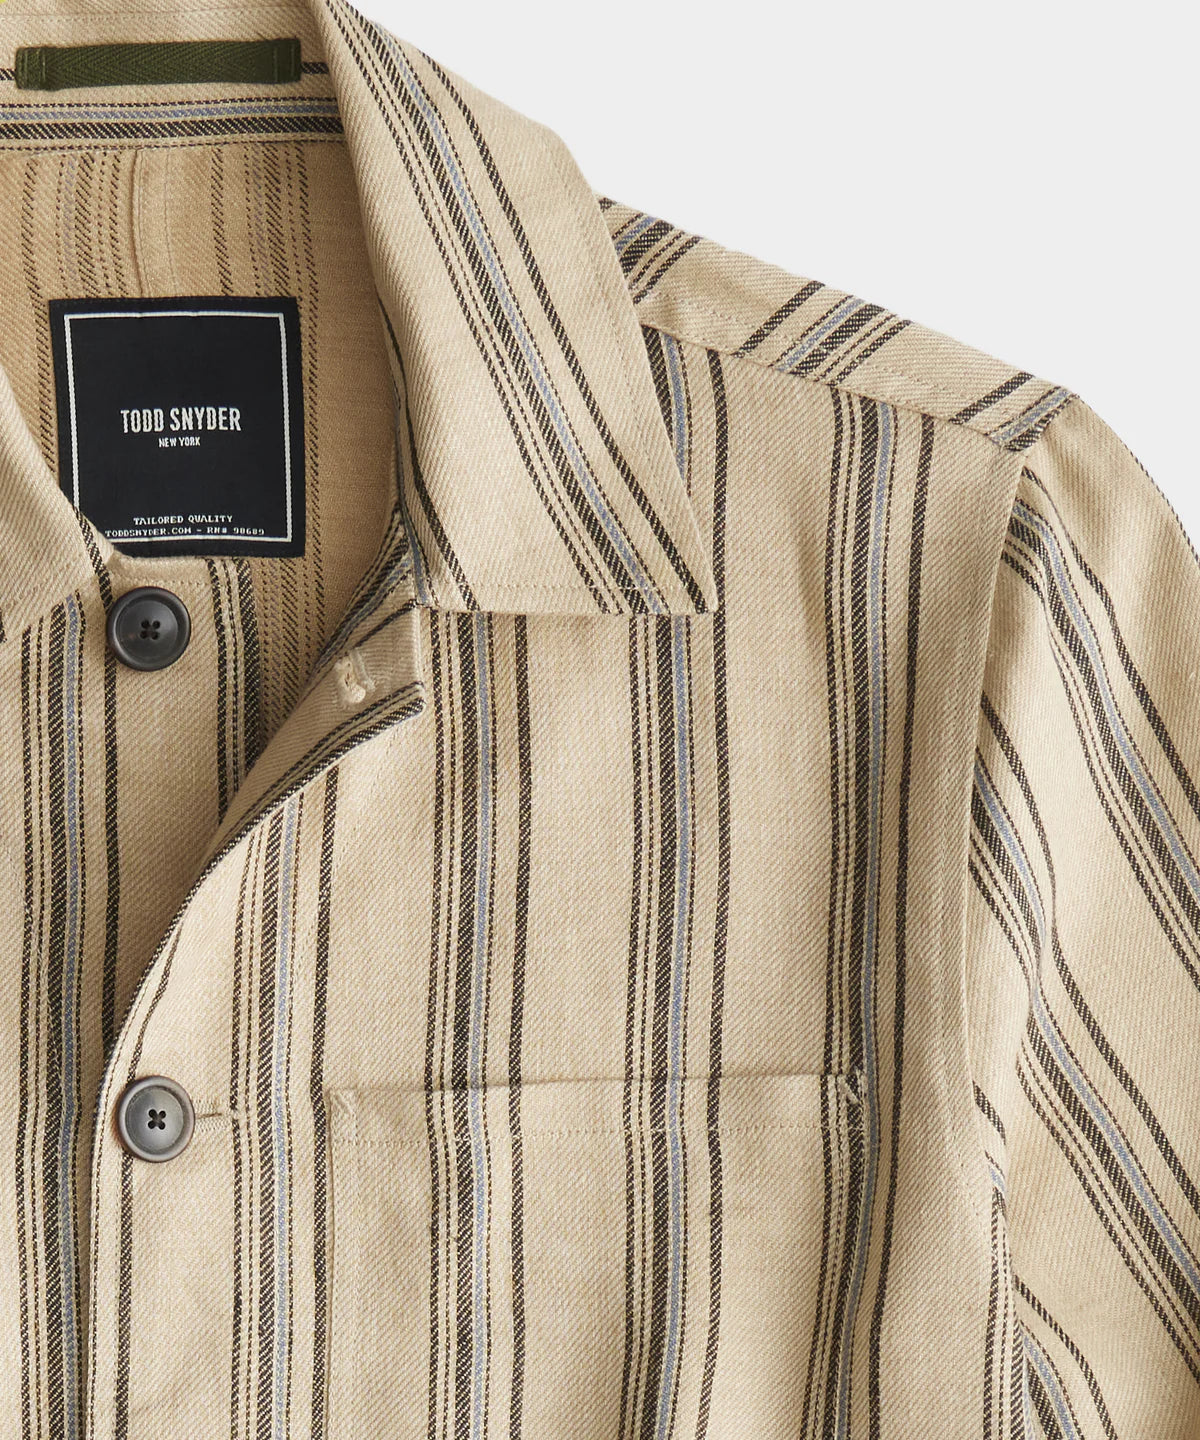 Todd Snyder - TODD SNYDER ITALIAN LINEN CHORE SHIRT IN STRIPE - Rent With Thred